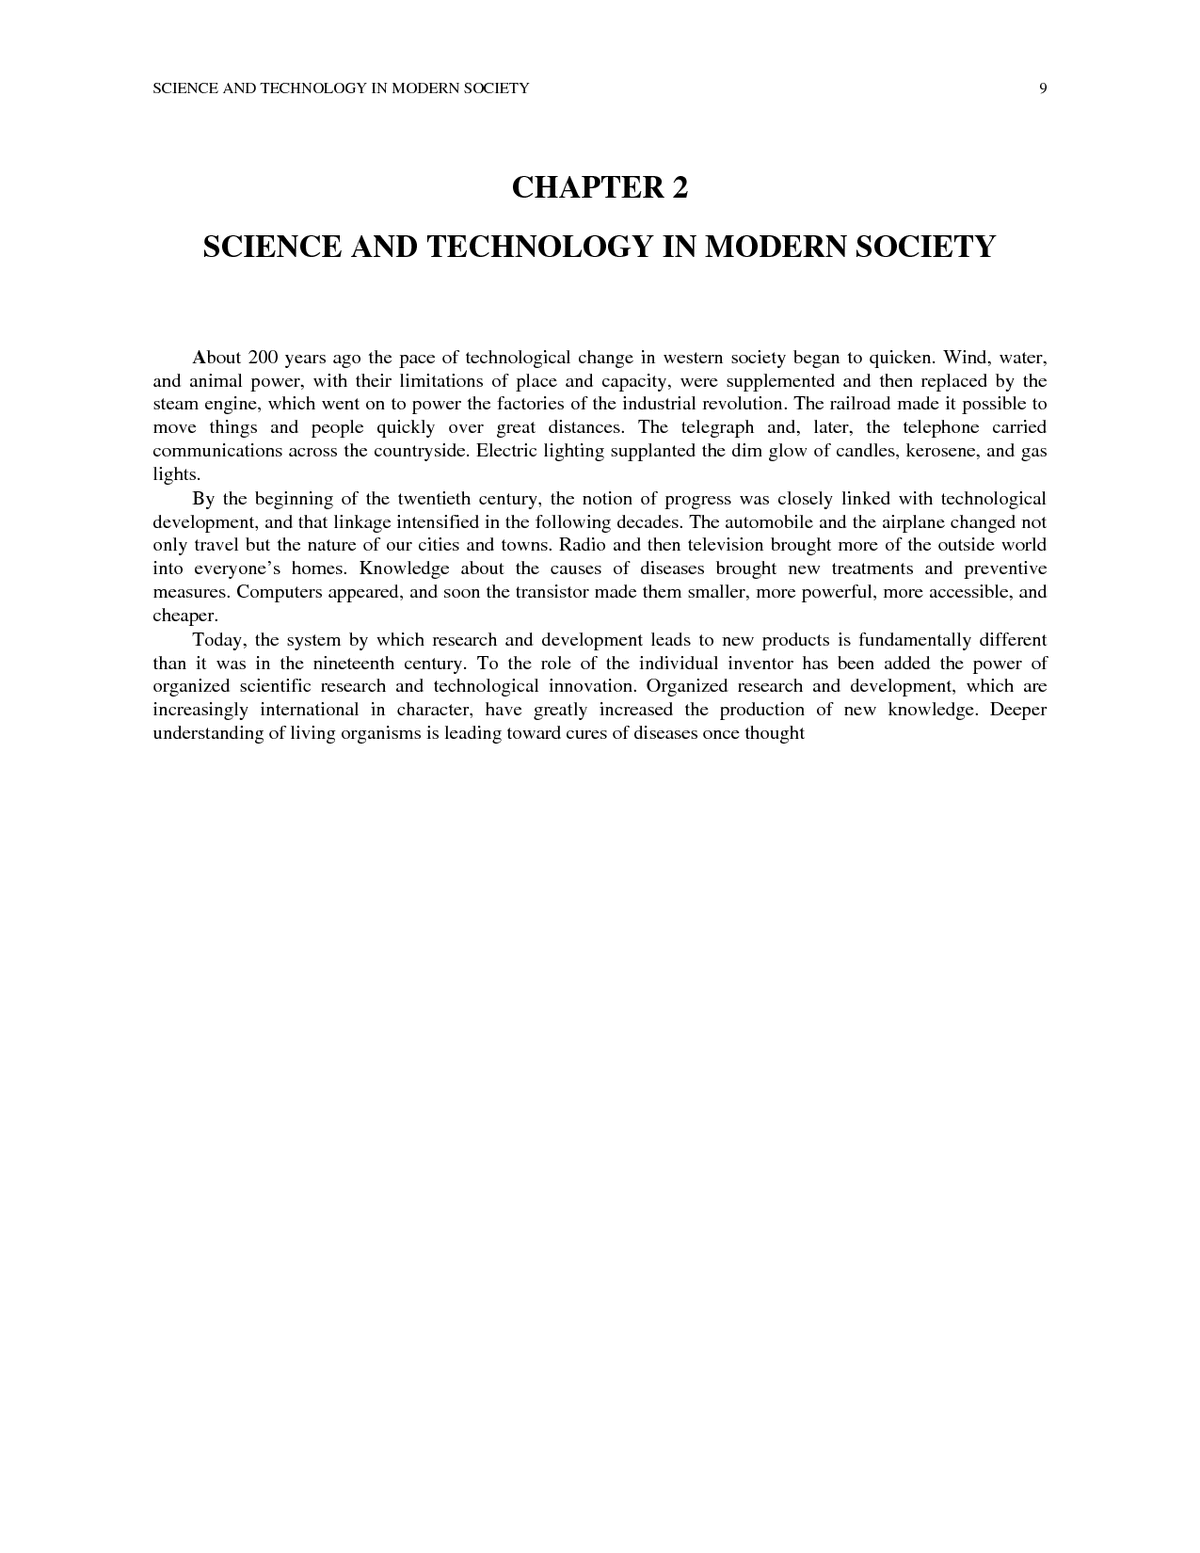 essay importance of science and technology